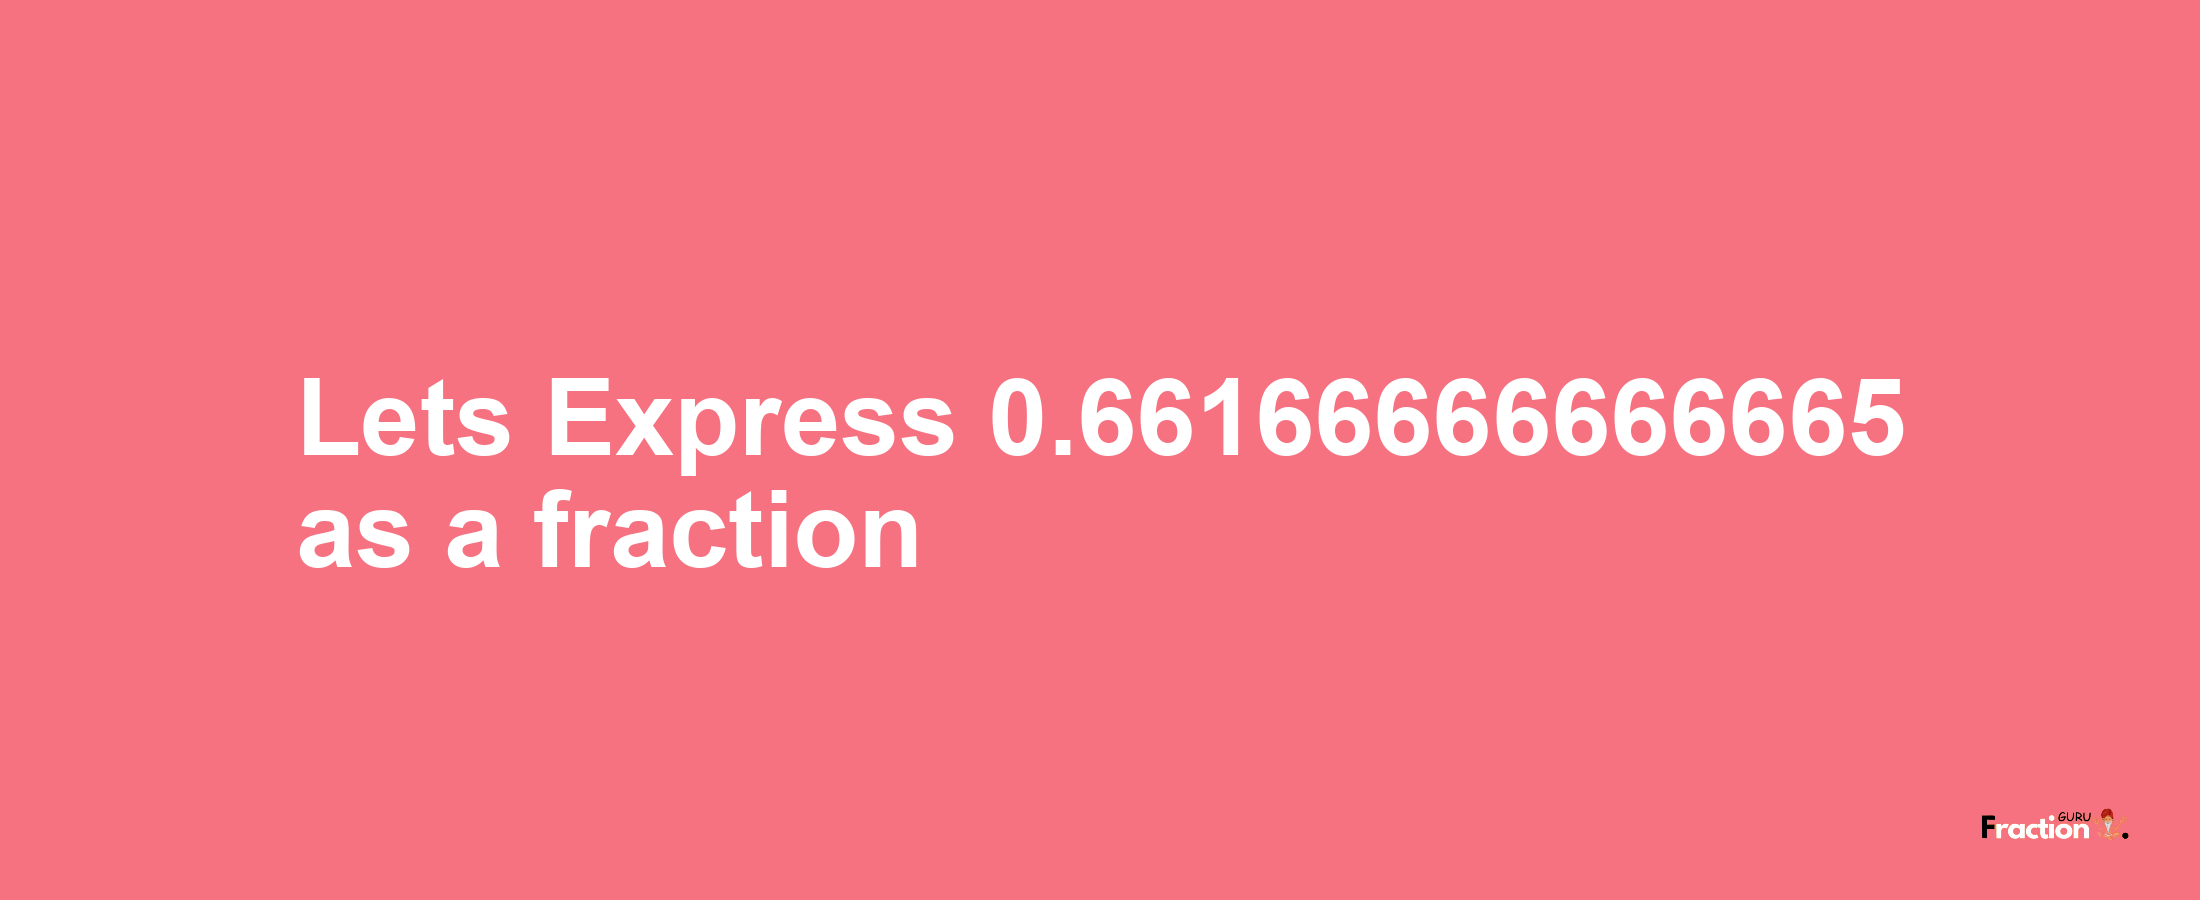 Lets Express 0.66166666666665 as afraction